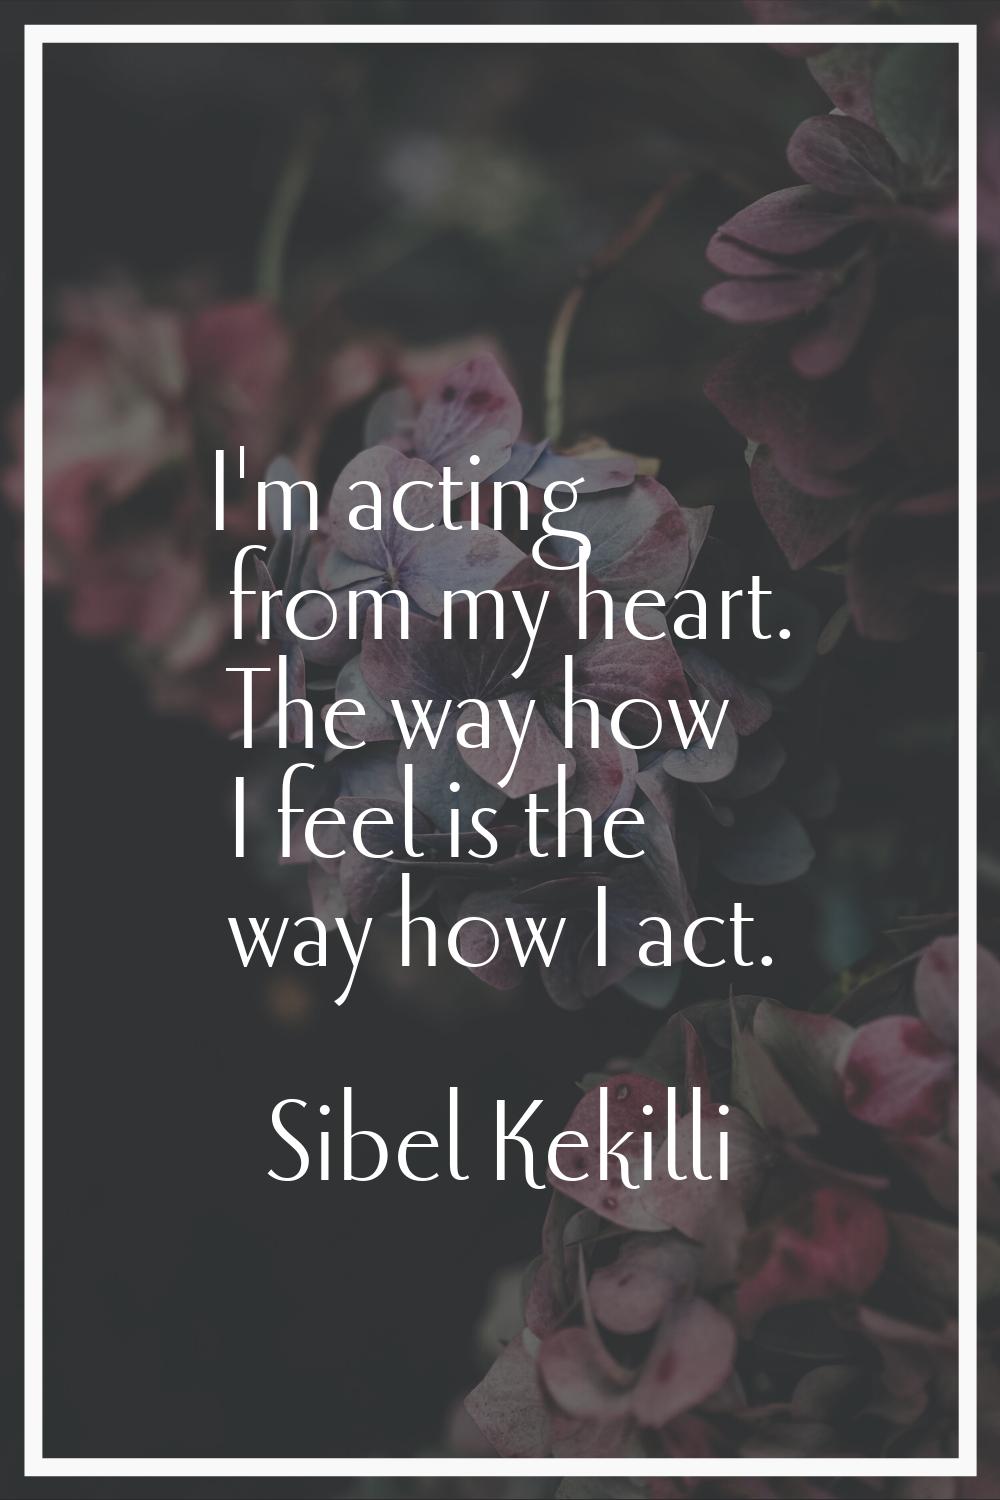 I'm acting from my heart. The way how I feel is the way how I act.